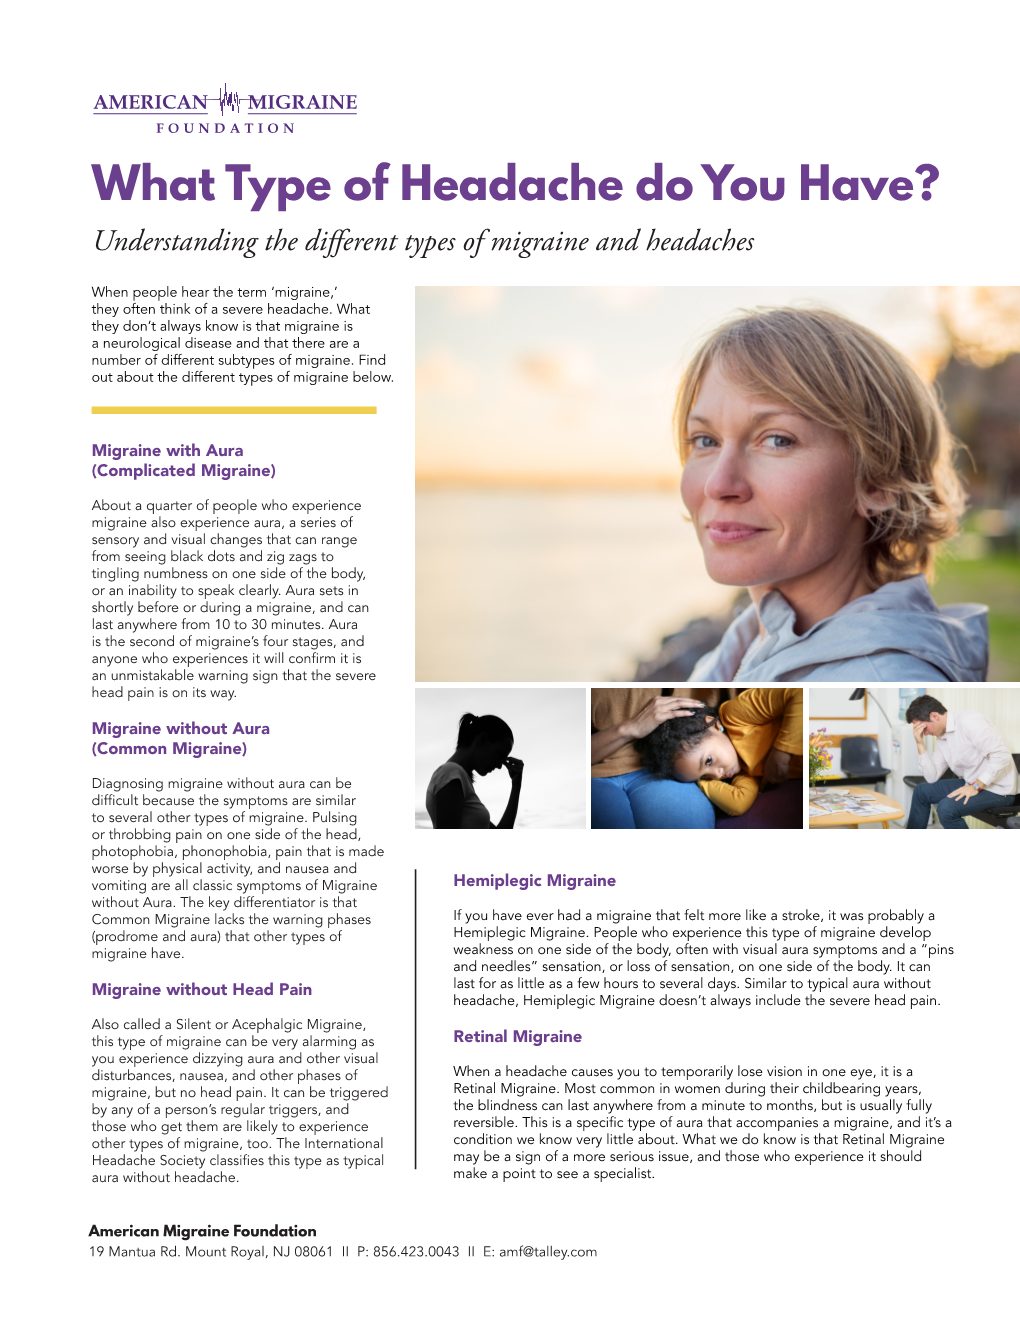 What Type of Headache Do You Have? Understanding the Different Types of Migraine and Headaches